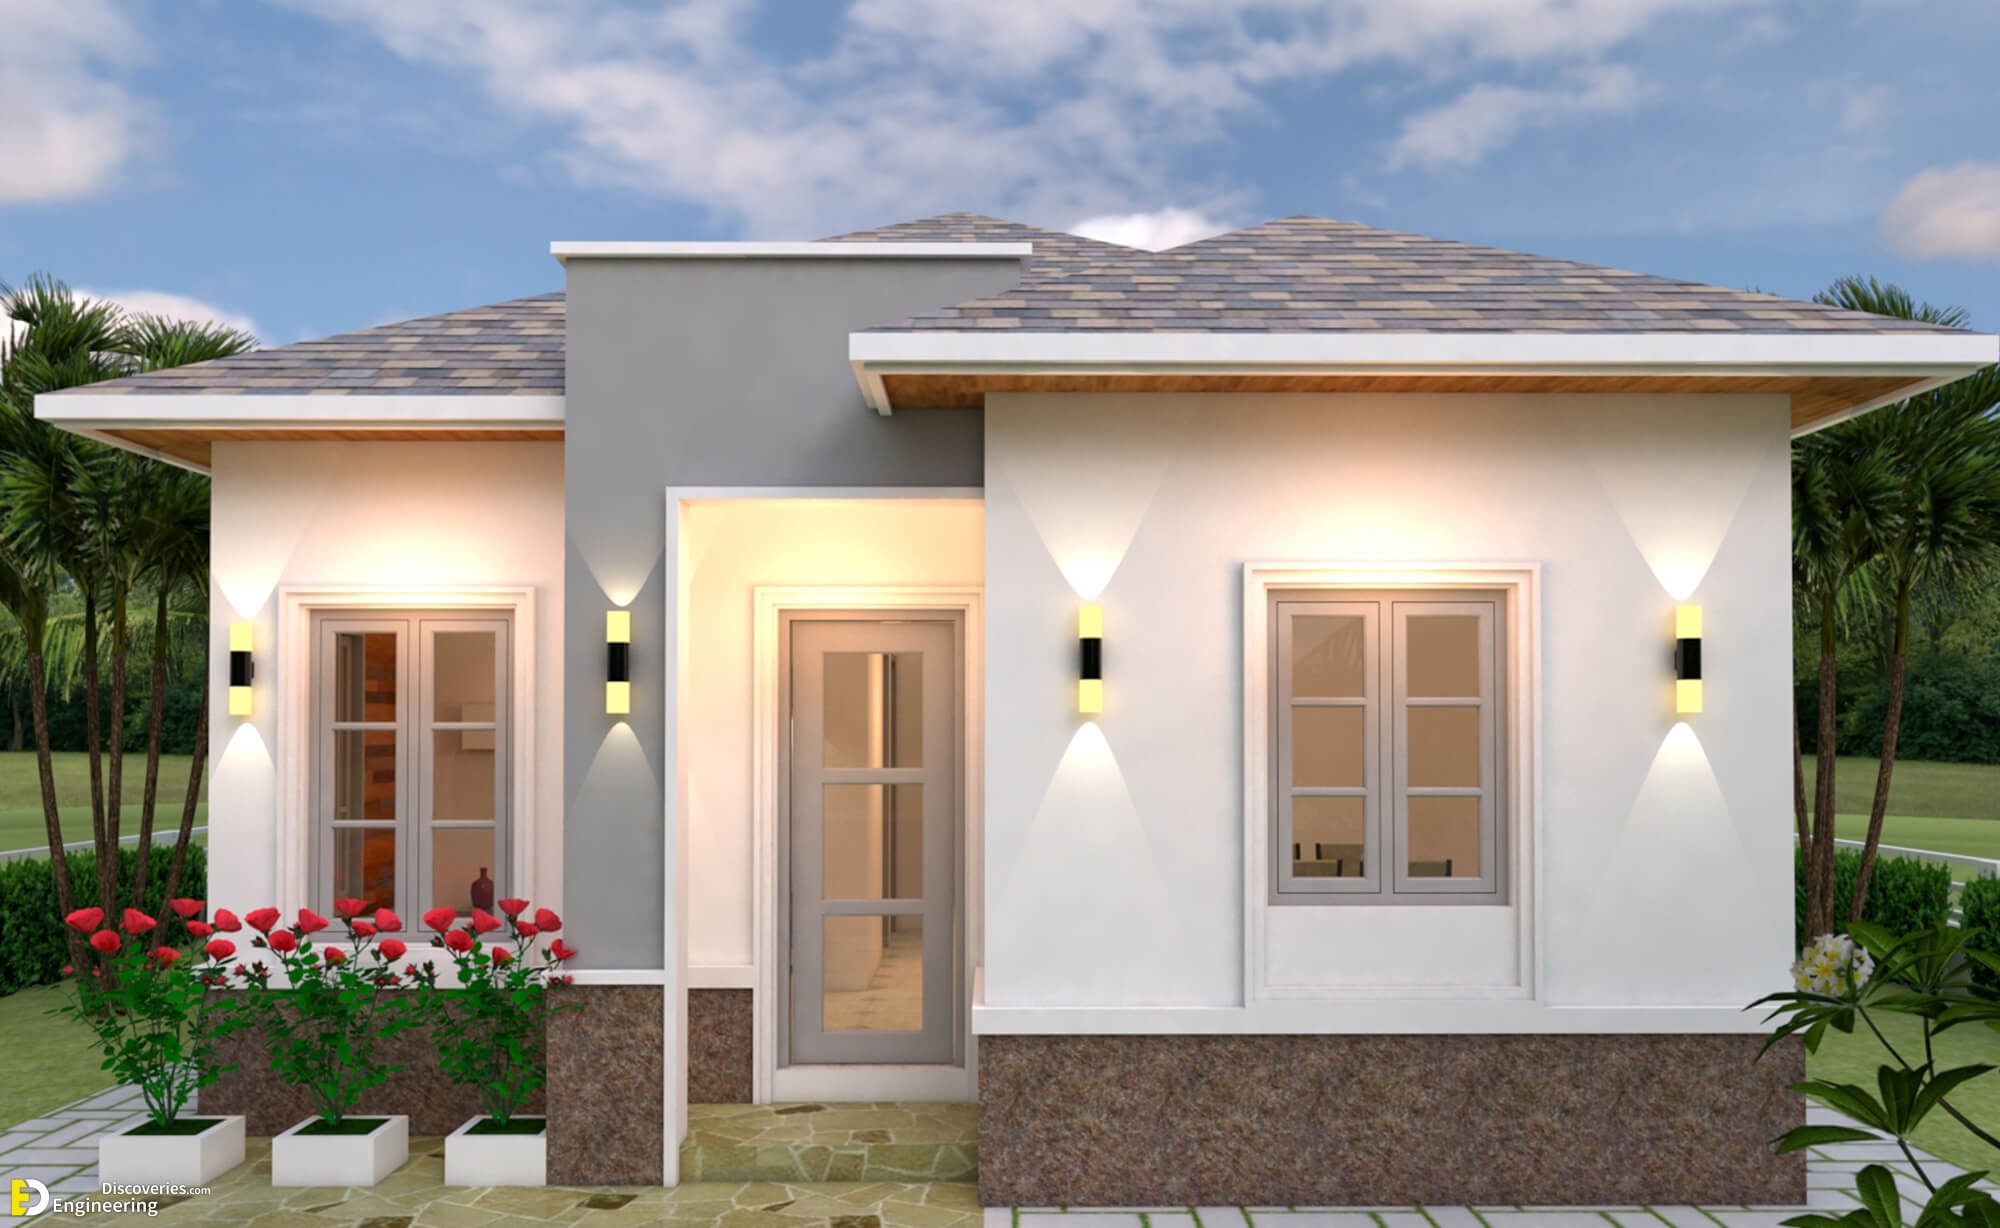 House Plans 7×10 with 3 Bedrooms | Engineering Discoveries